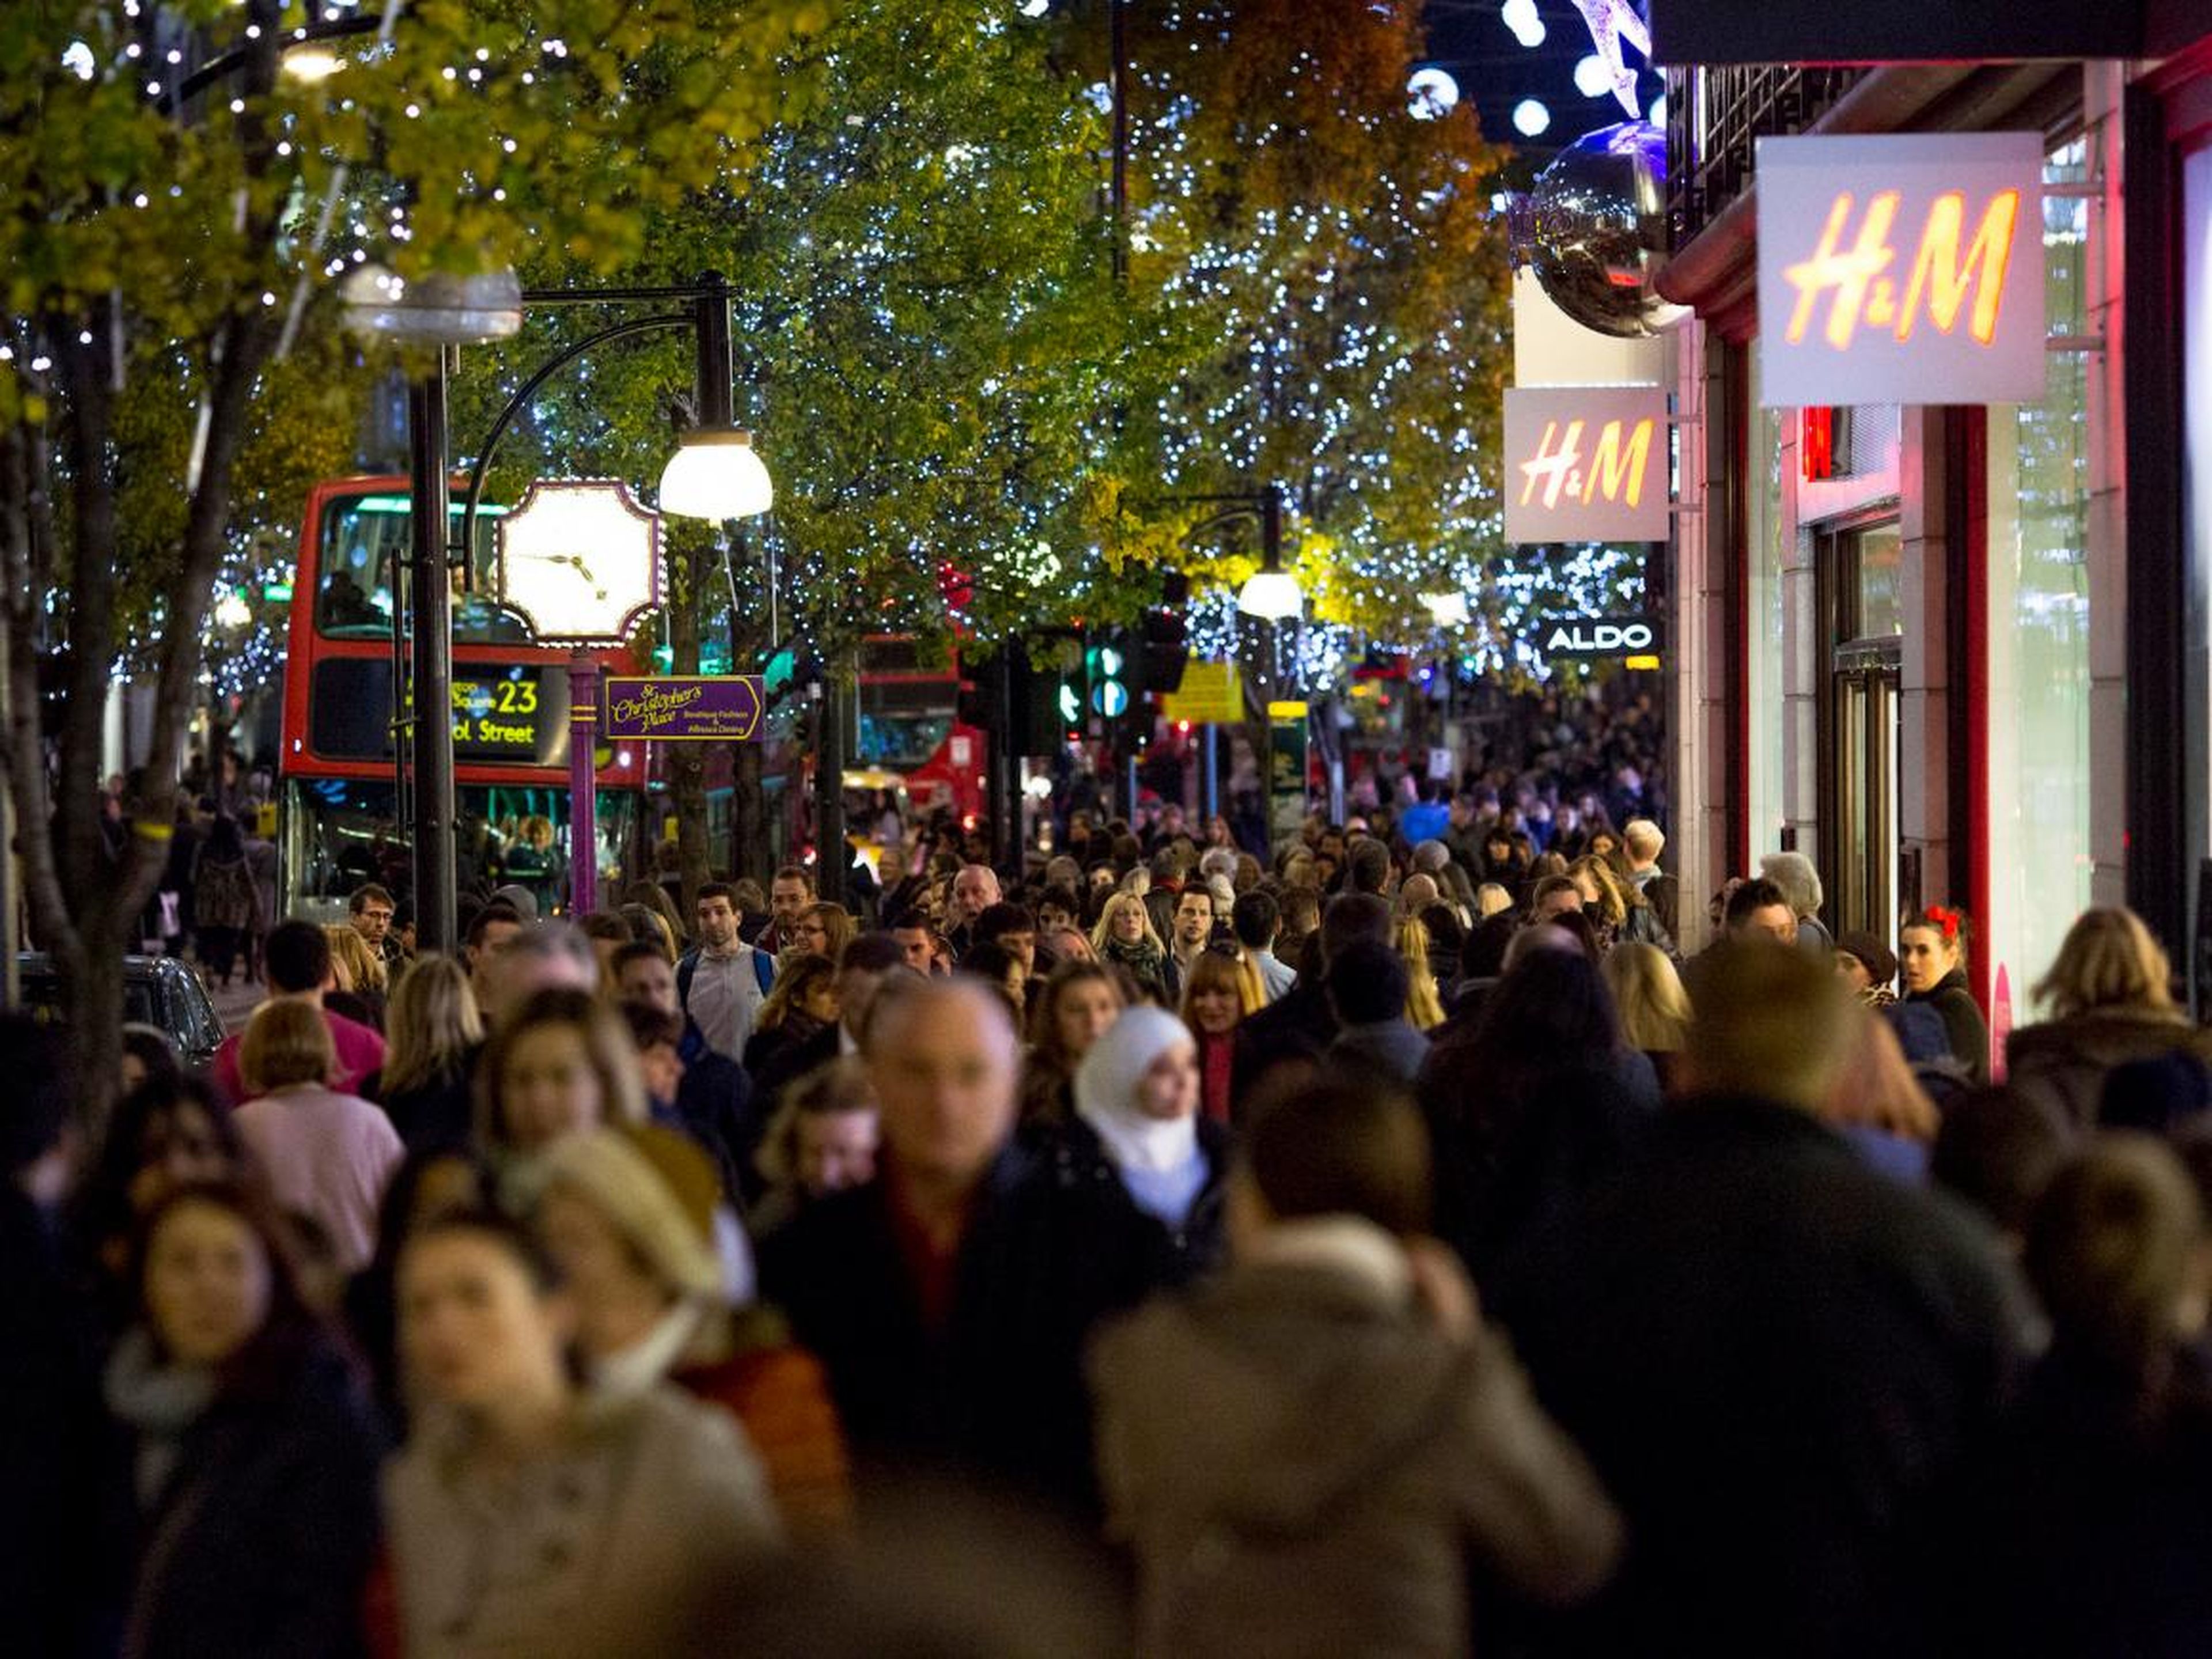 Stores in the UK began offering Black Friday sales following American Thanksgiving in November, despite it being a holiday unique to the US.